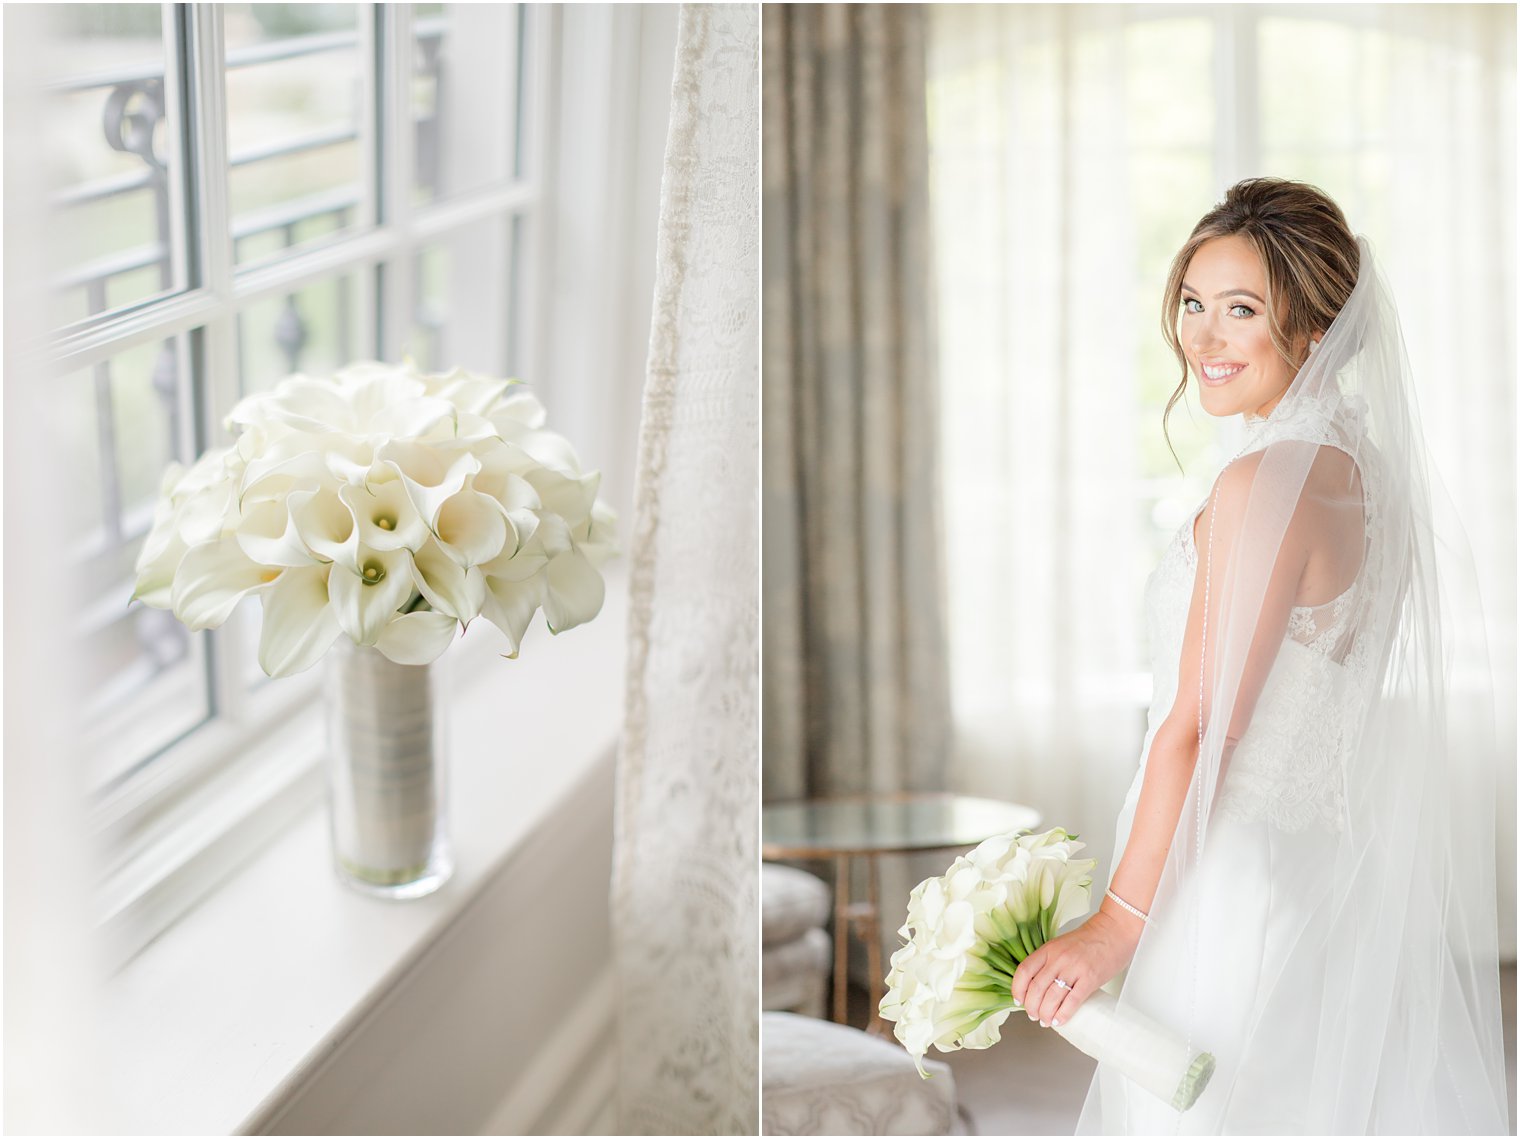 Bridal portraits at Park Chateau Estate and Gardens